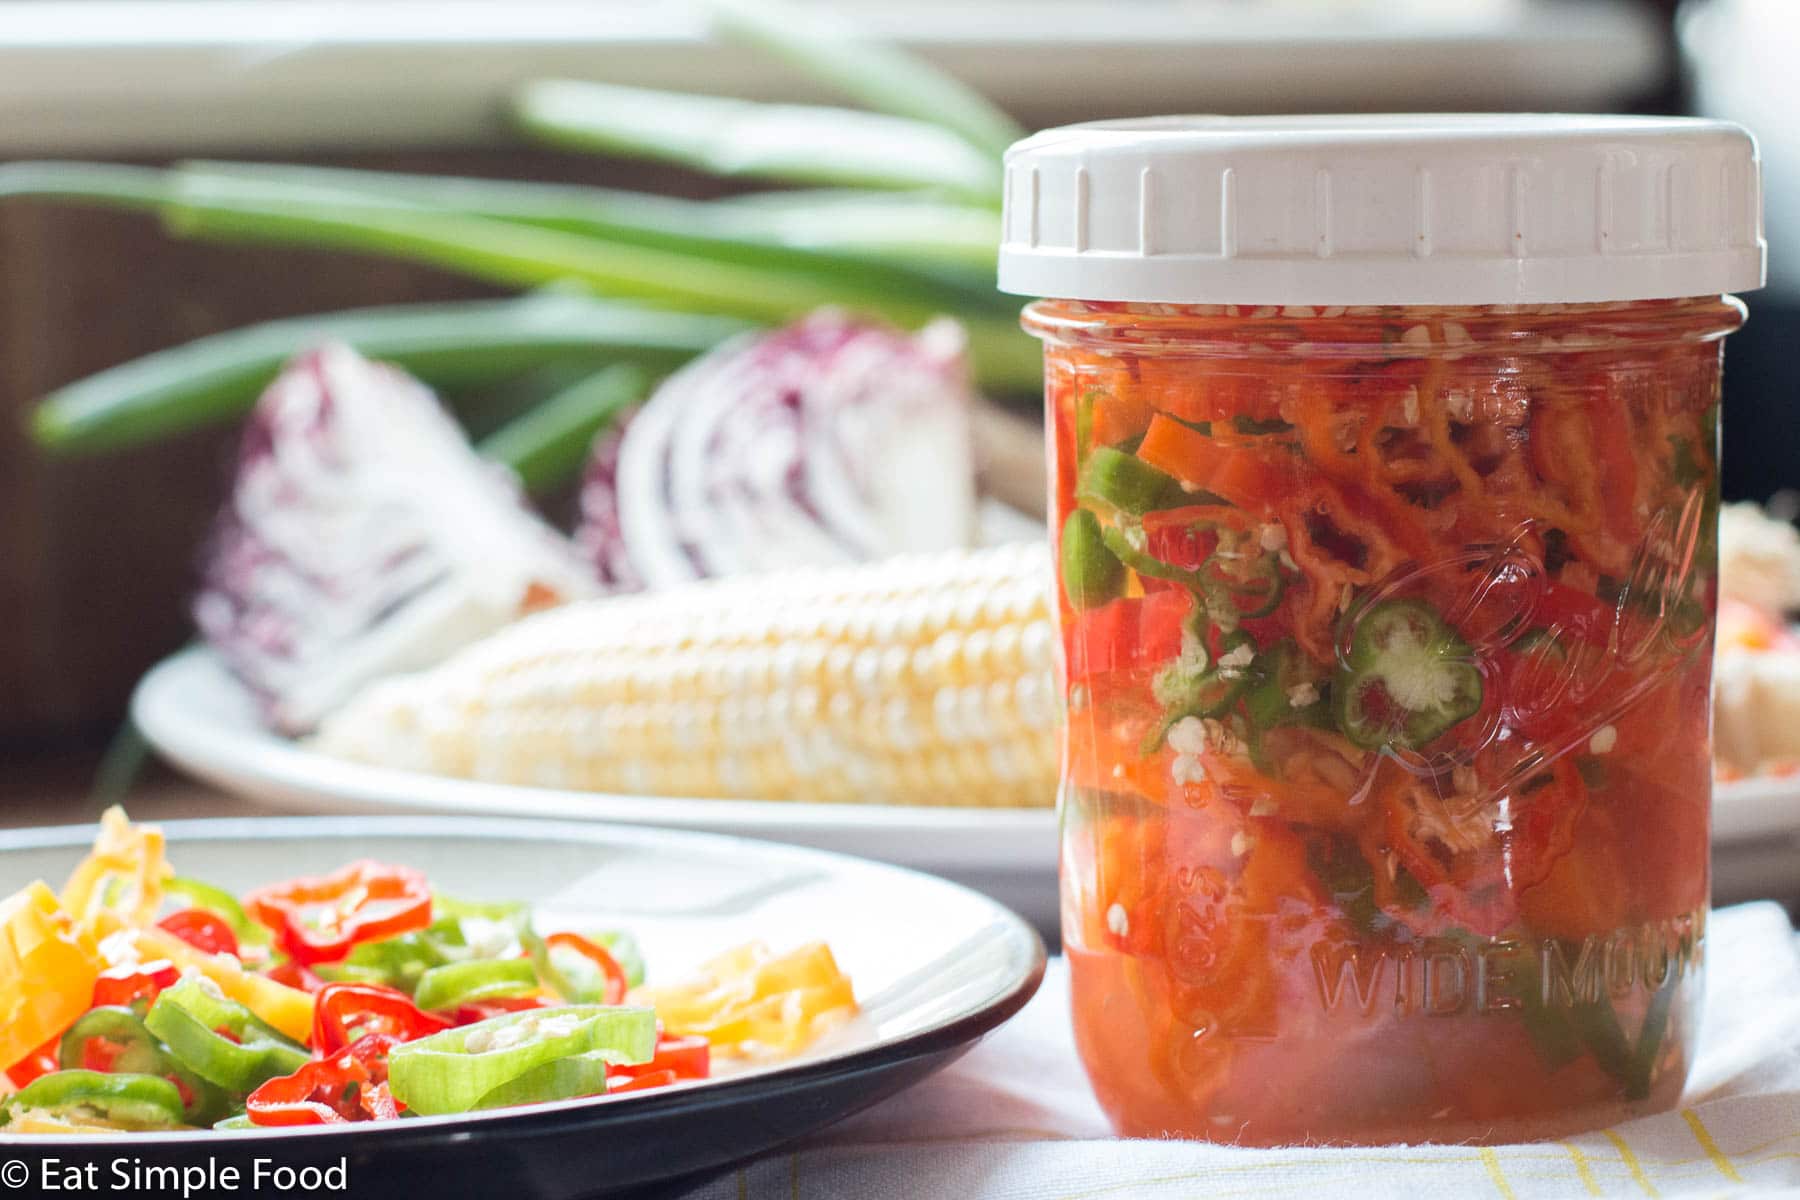 Mason Jar with White Lid of Preserved Sliced Red, Orange, & Yellow Shishito Peppers